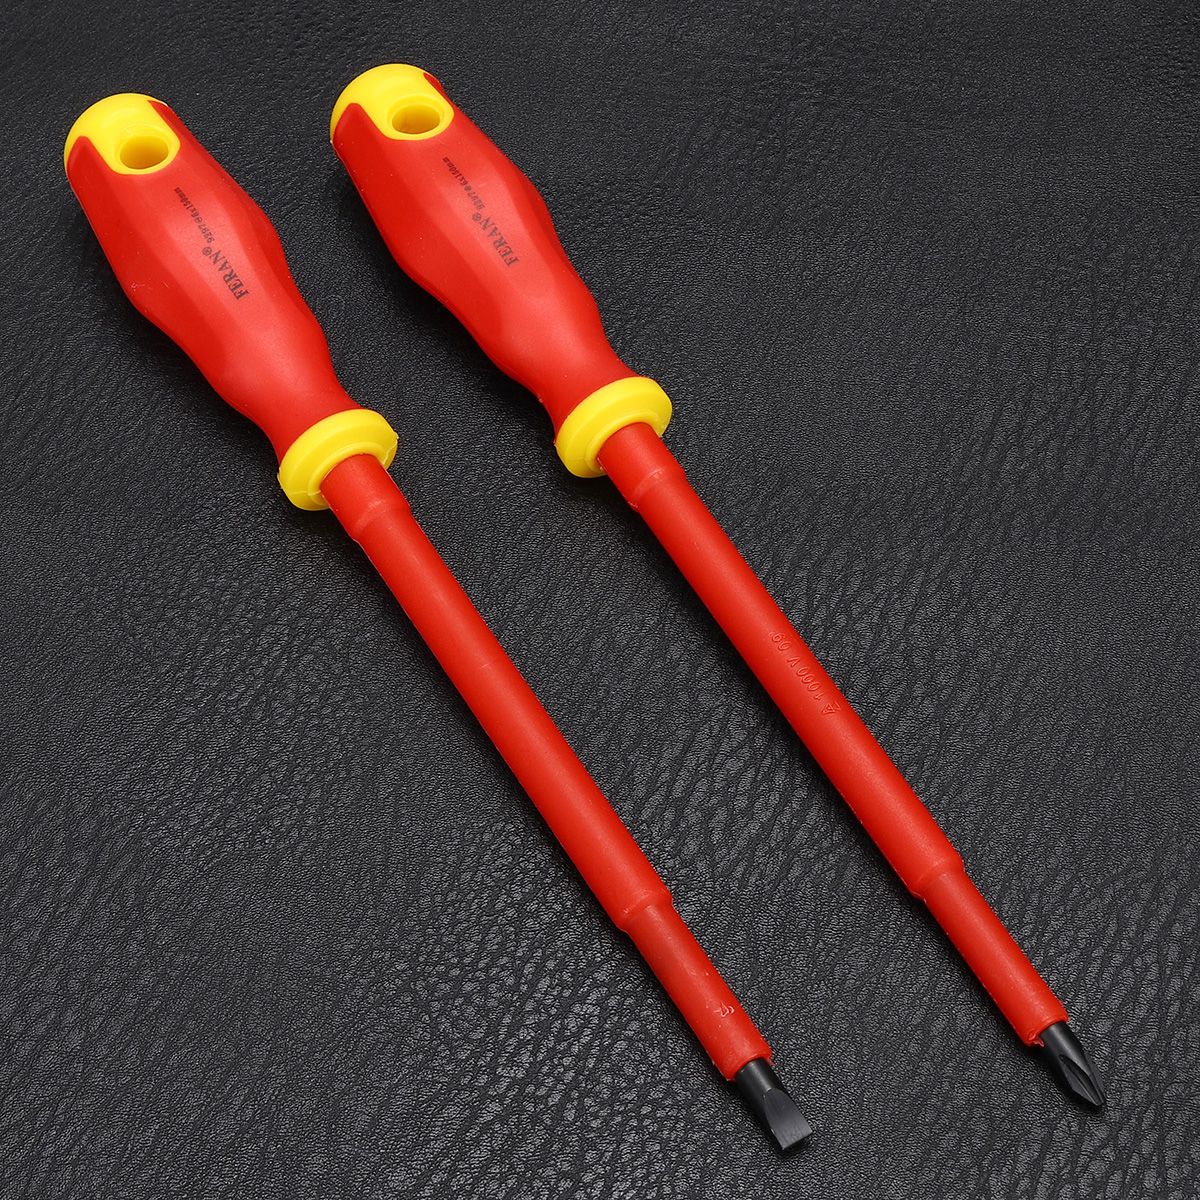 1000W-High-Voltage-Insulated-Screwdriver-Slotted-Screwdriver-Phillips-Screwdrivers-1414093